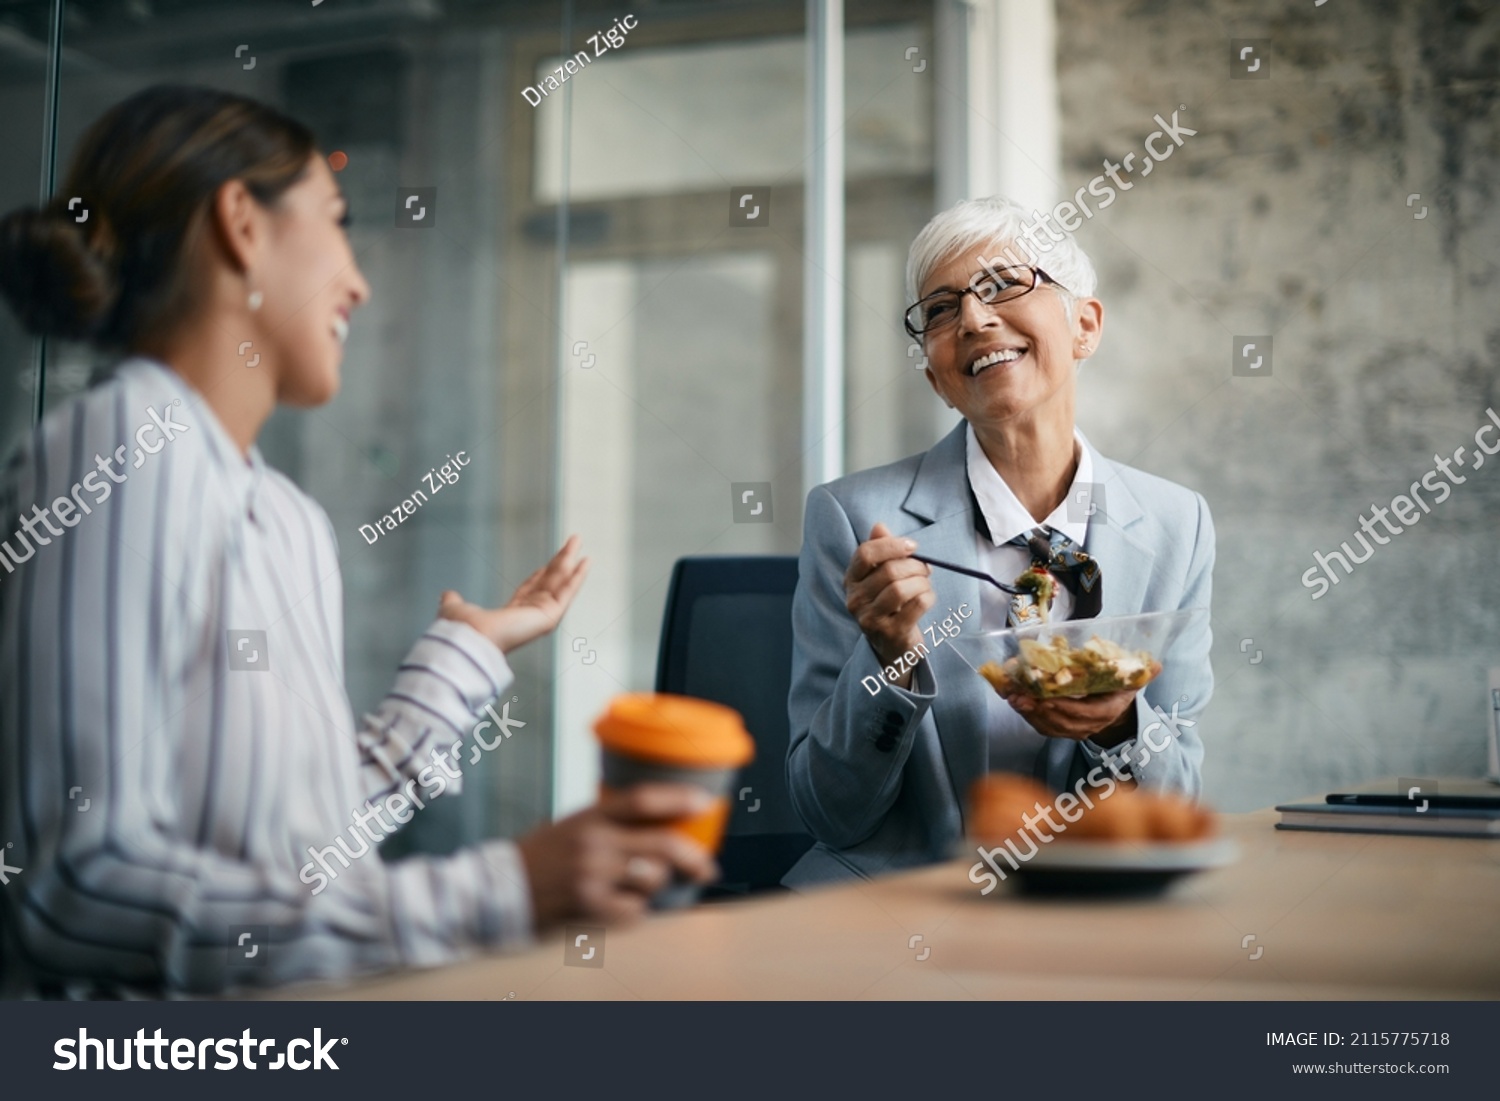 Happy mature businesswoman enjoying in conversation with female coworker during her lunch break in the office. #2115775718